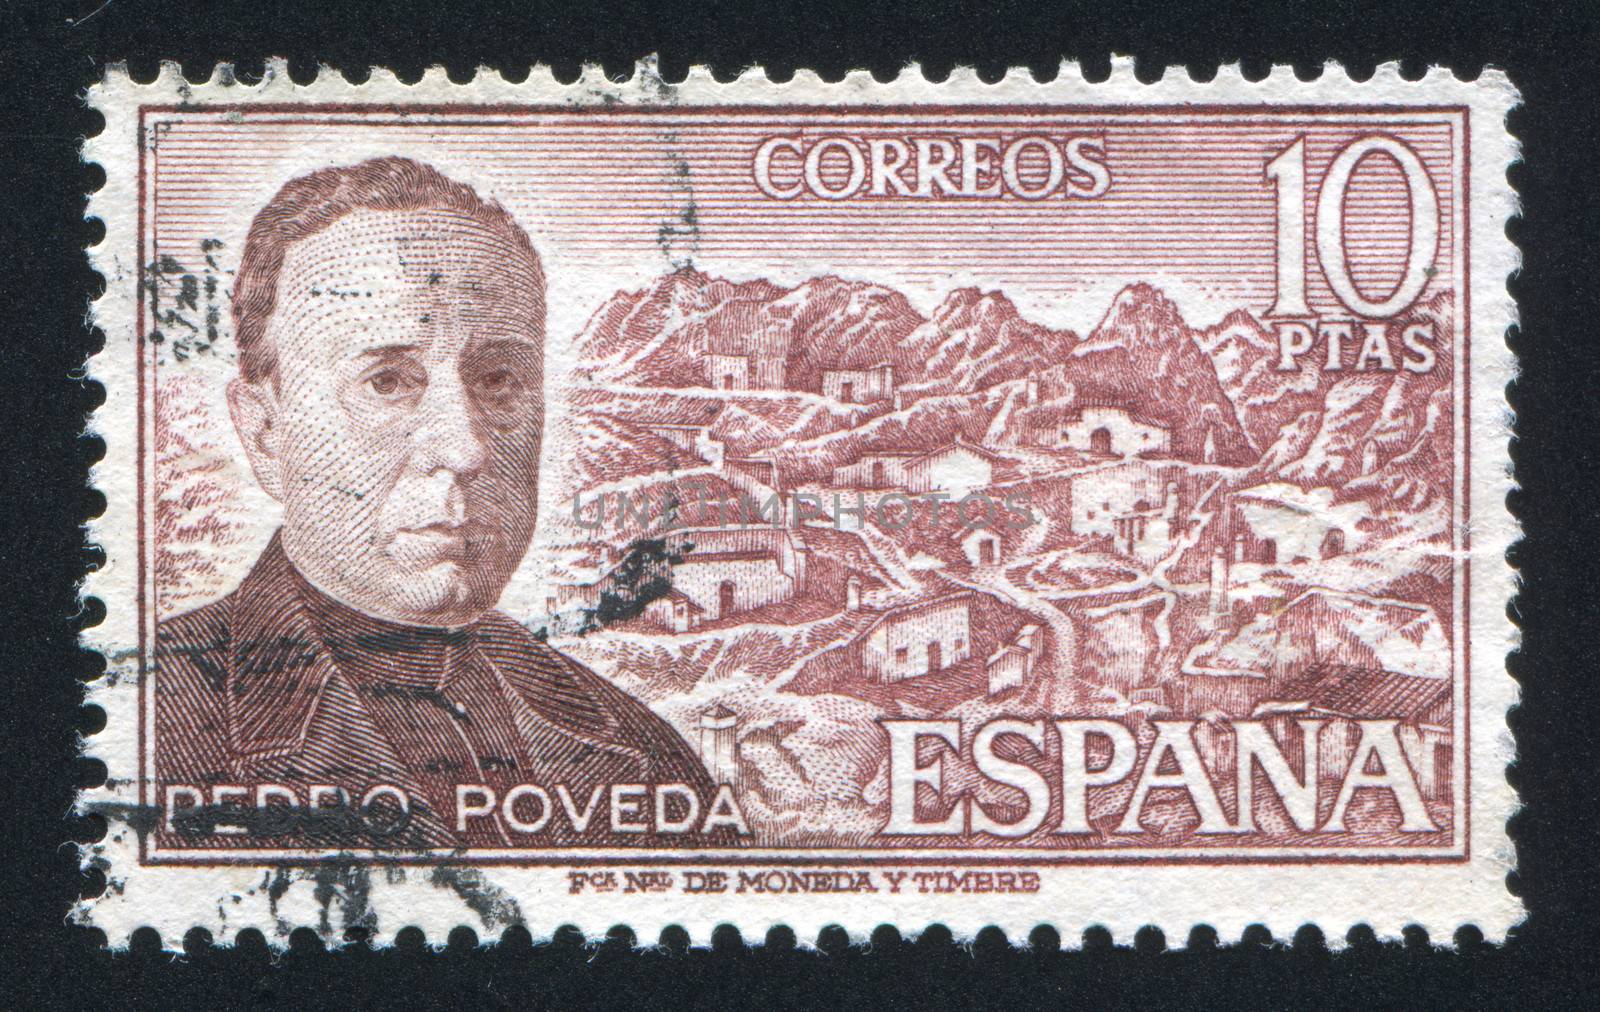 Father Pedro Poveda by rook